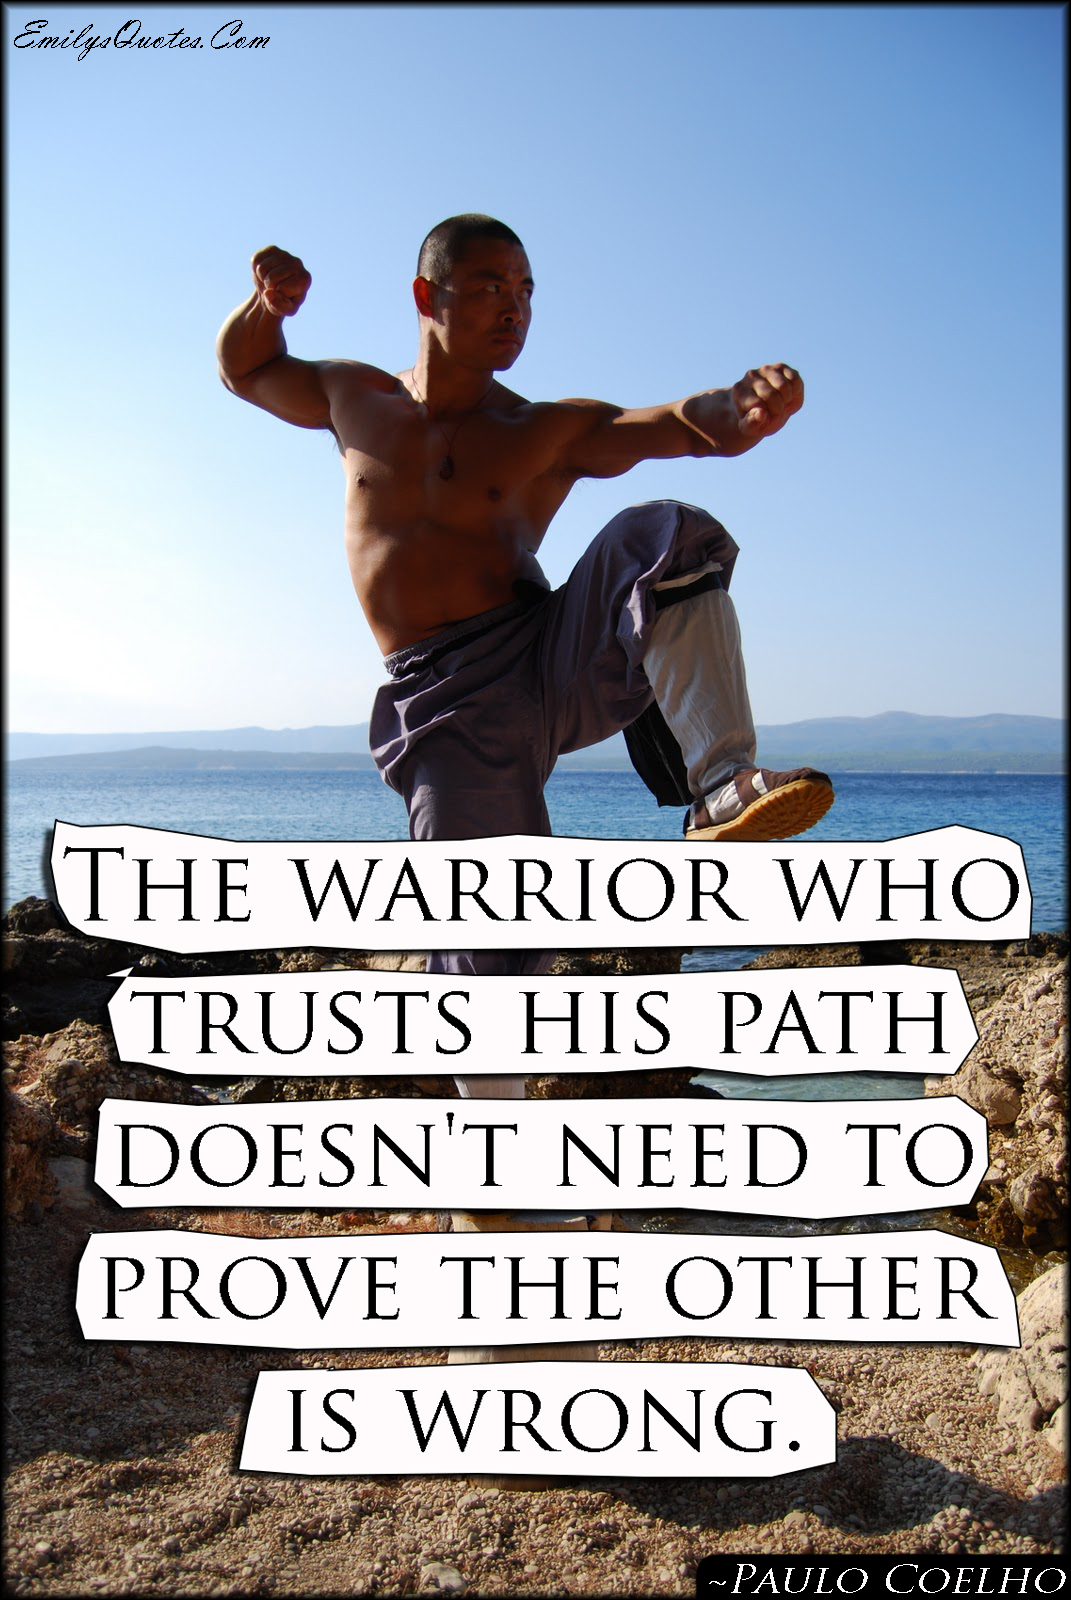 The warrior who trusts his path doesn’t need to prove the other is wrong